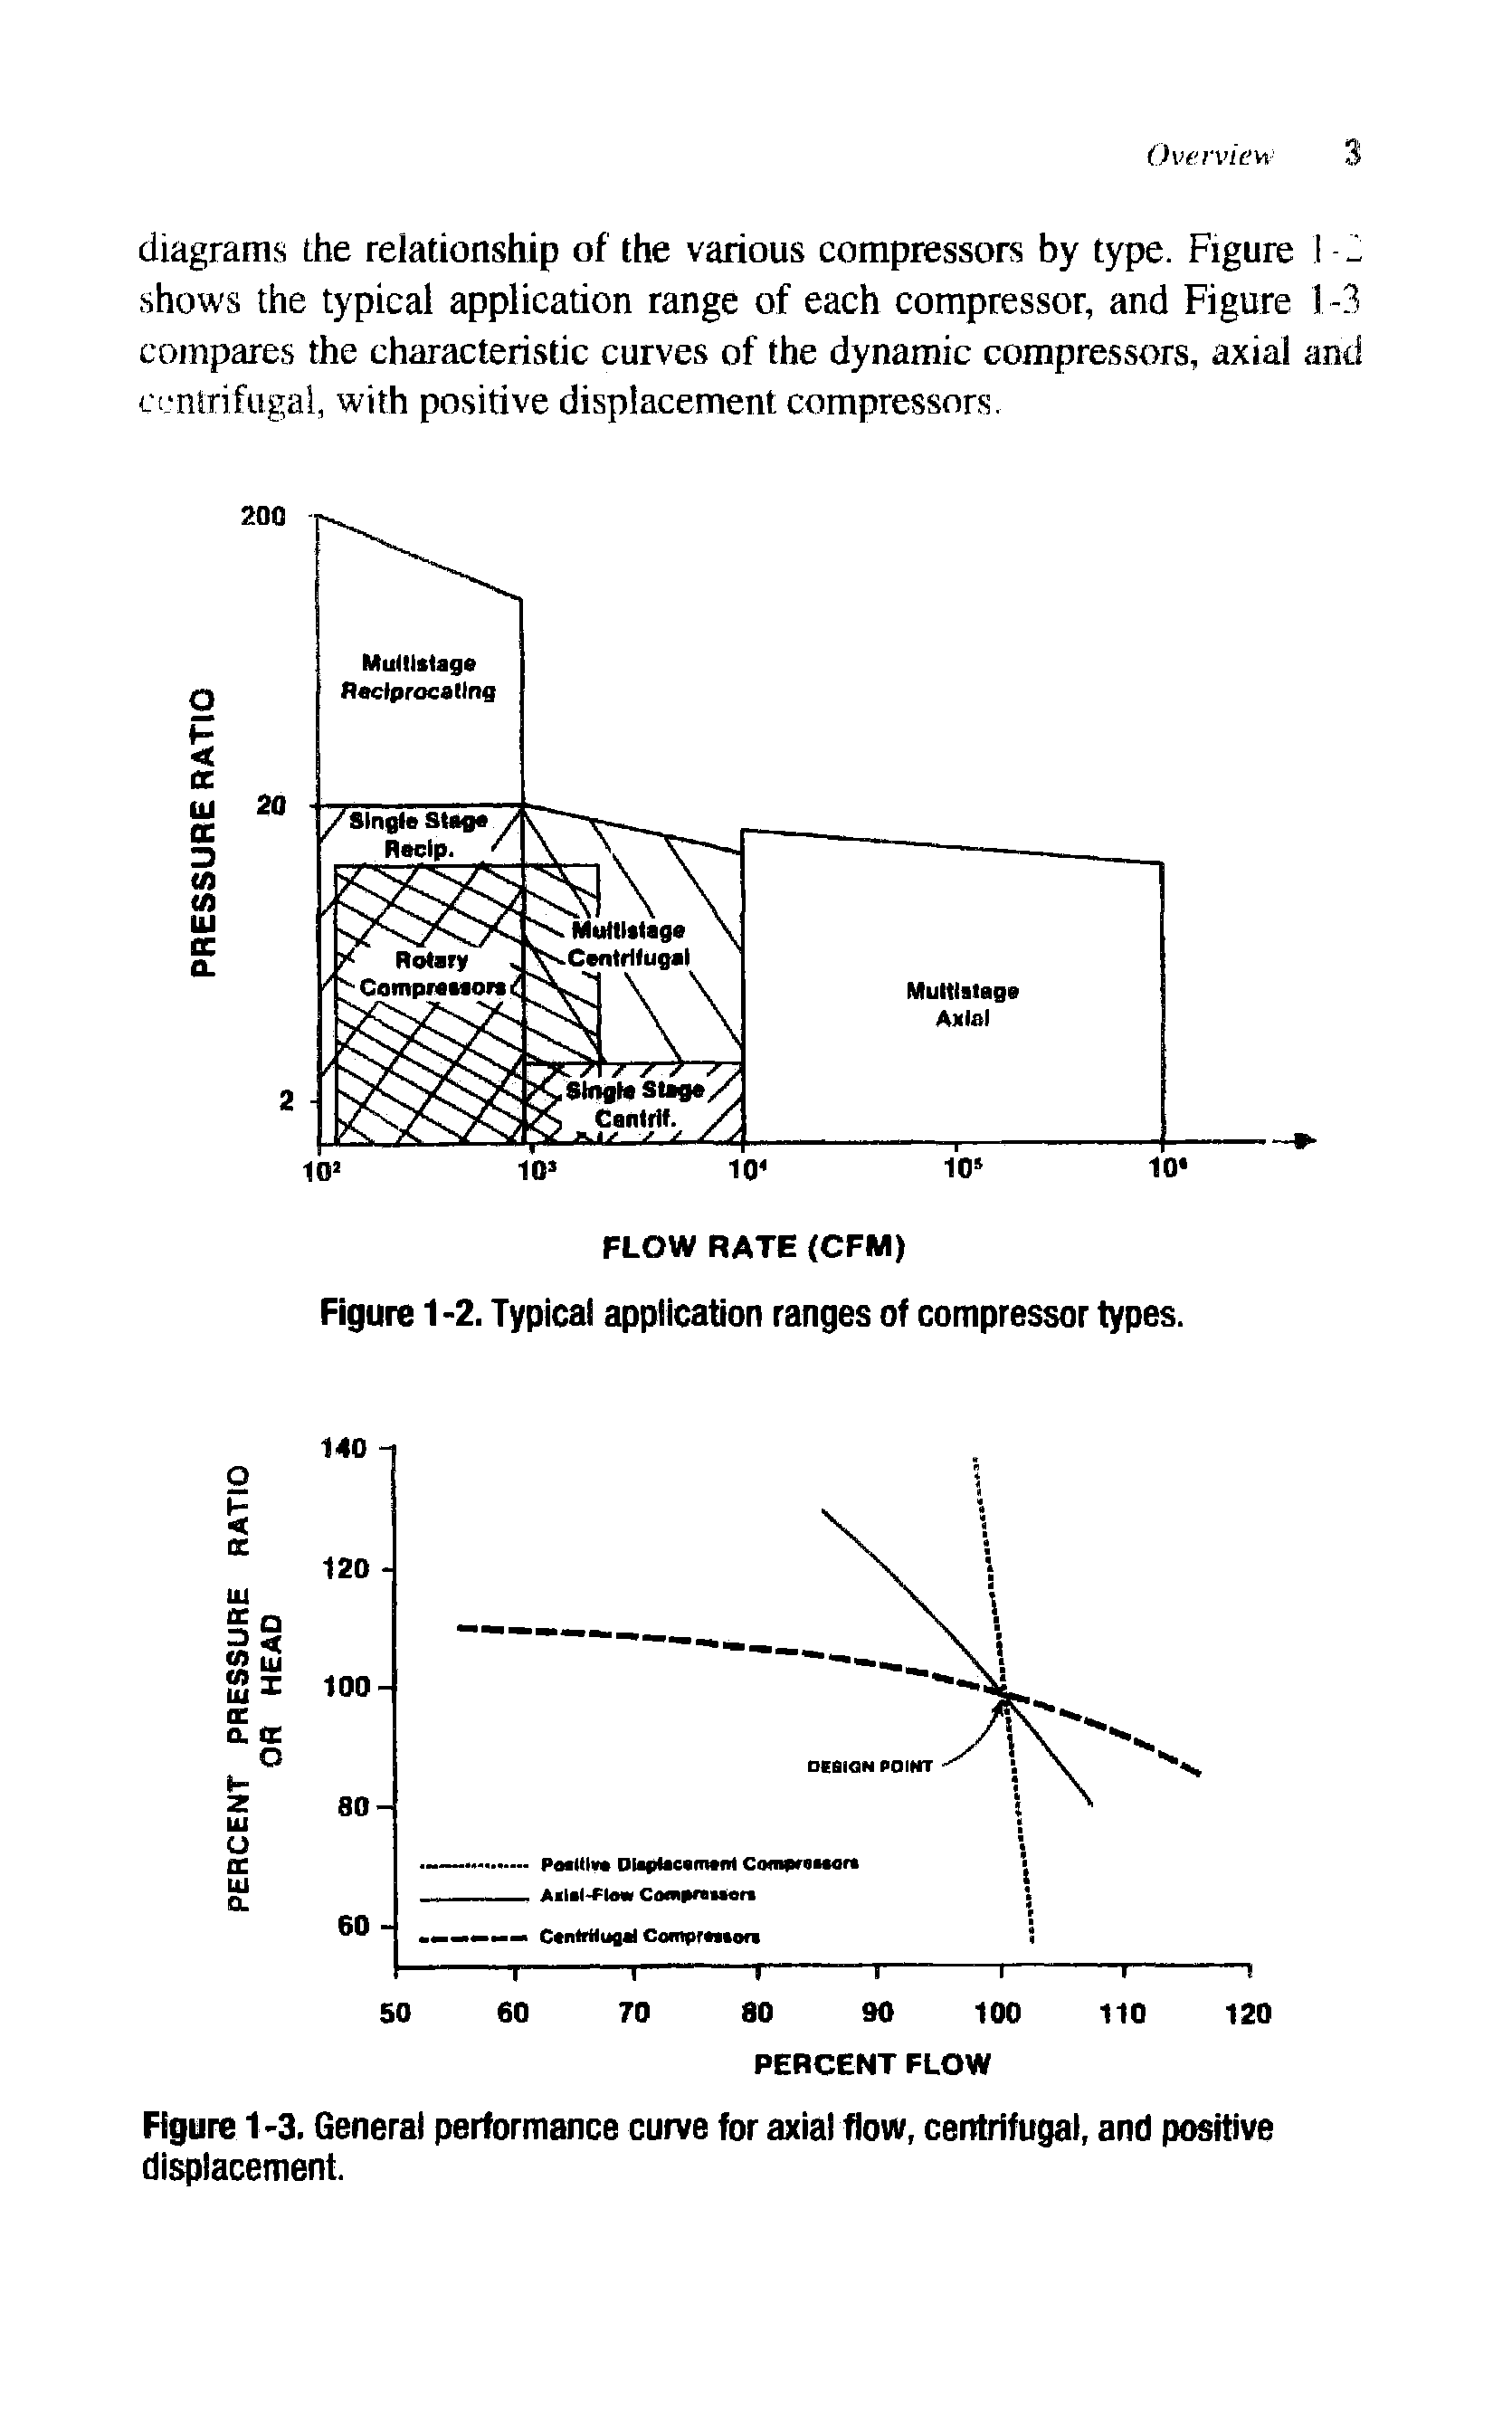 Figure 1-3. General performance curve for axial flow, centrifugal, and positive displacement.